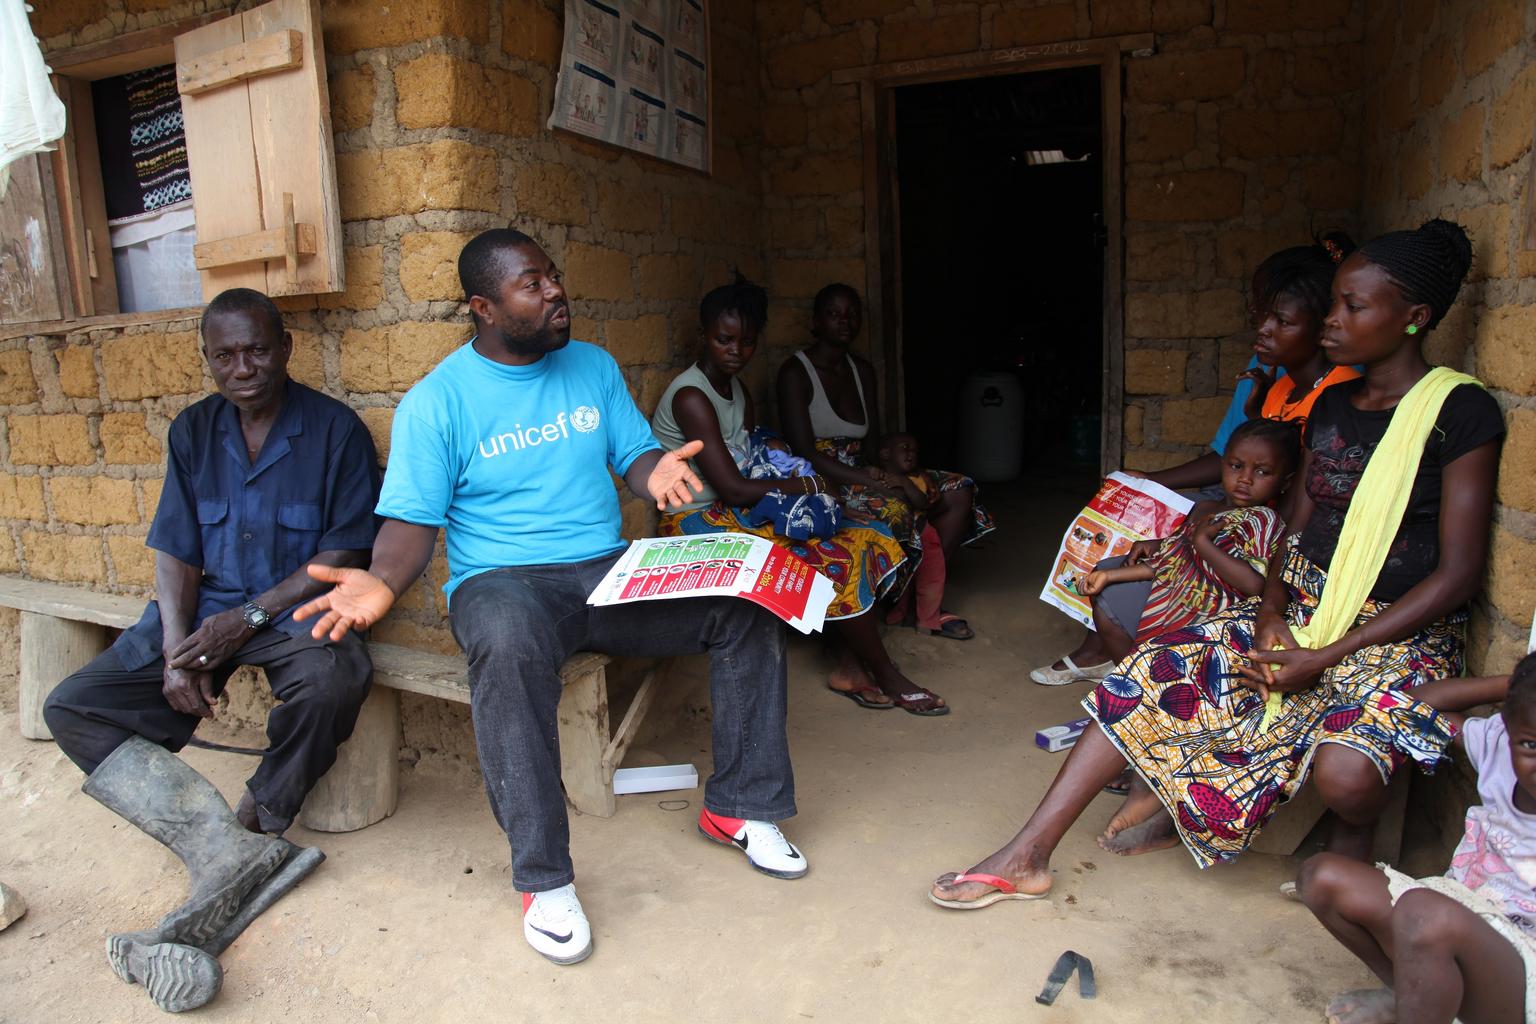 A UNICEF worker speaks with residents about the symptoms of Ebola and best practices to help prevent its spread in Voinjama, Liberia. © UNICEF/NYHQ2014-1016/Jallanzo